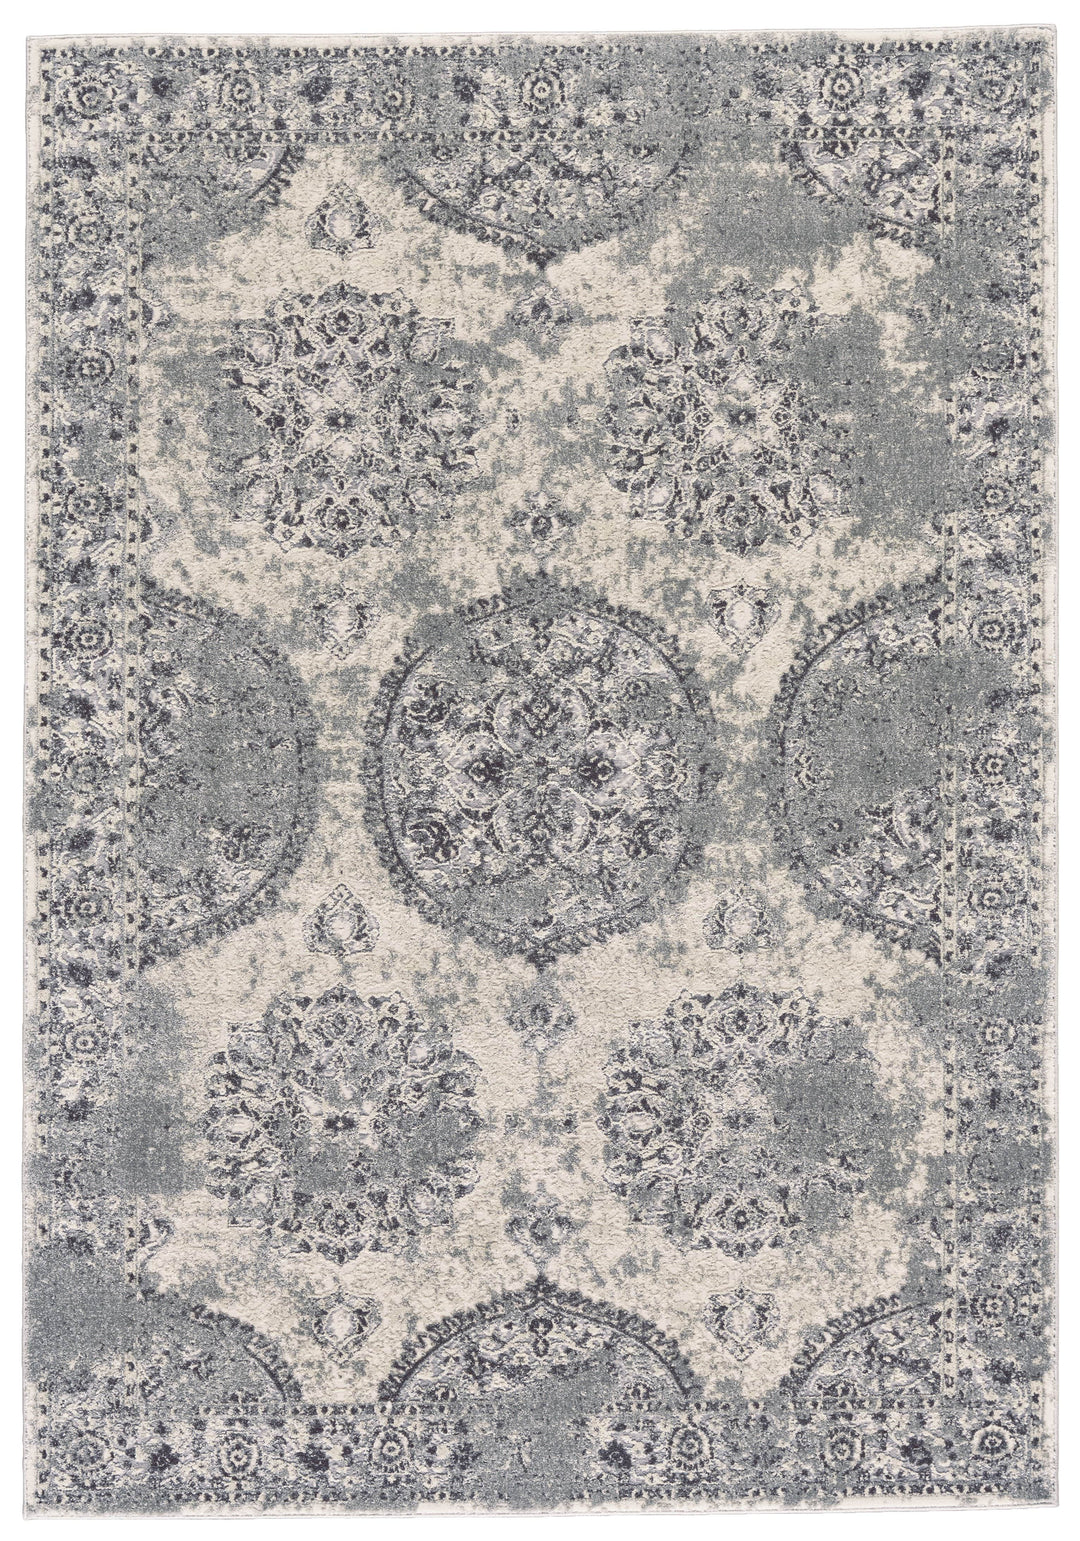 Feizy Feizy Akhari Distressed Medallion Rug - Available in 5 Sizes - Silver & Beige & Dark Gray 5' x 8' 6713684FSLVBGEE10